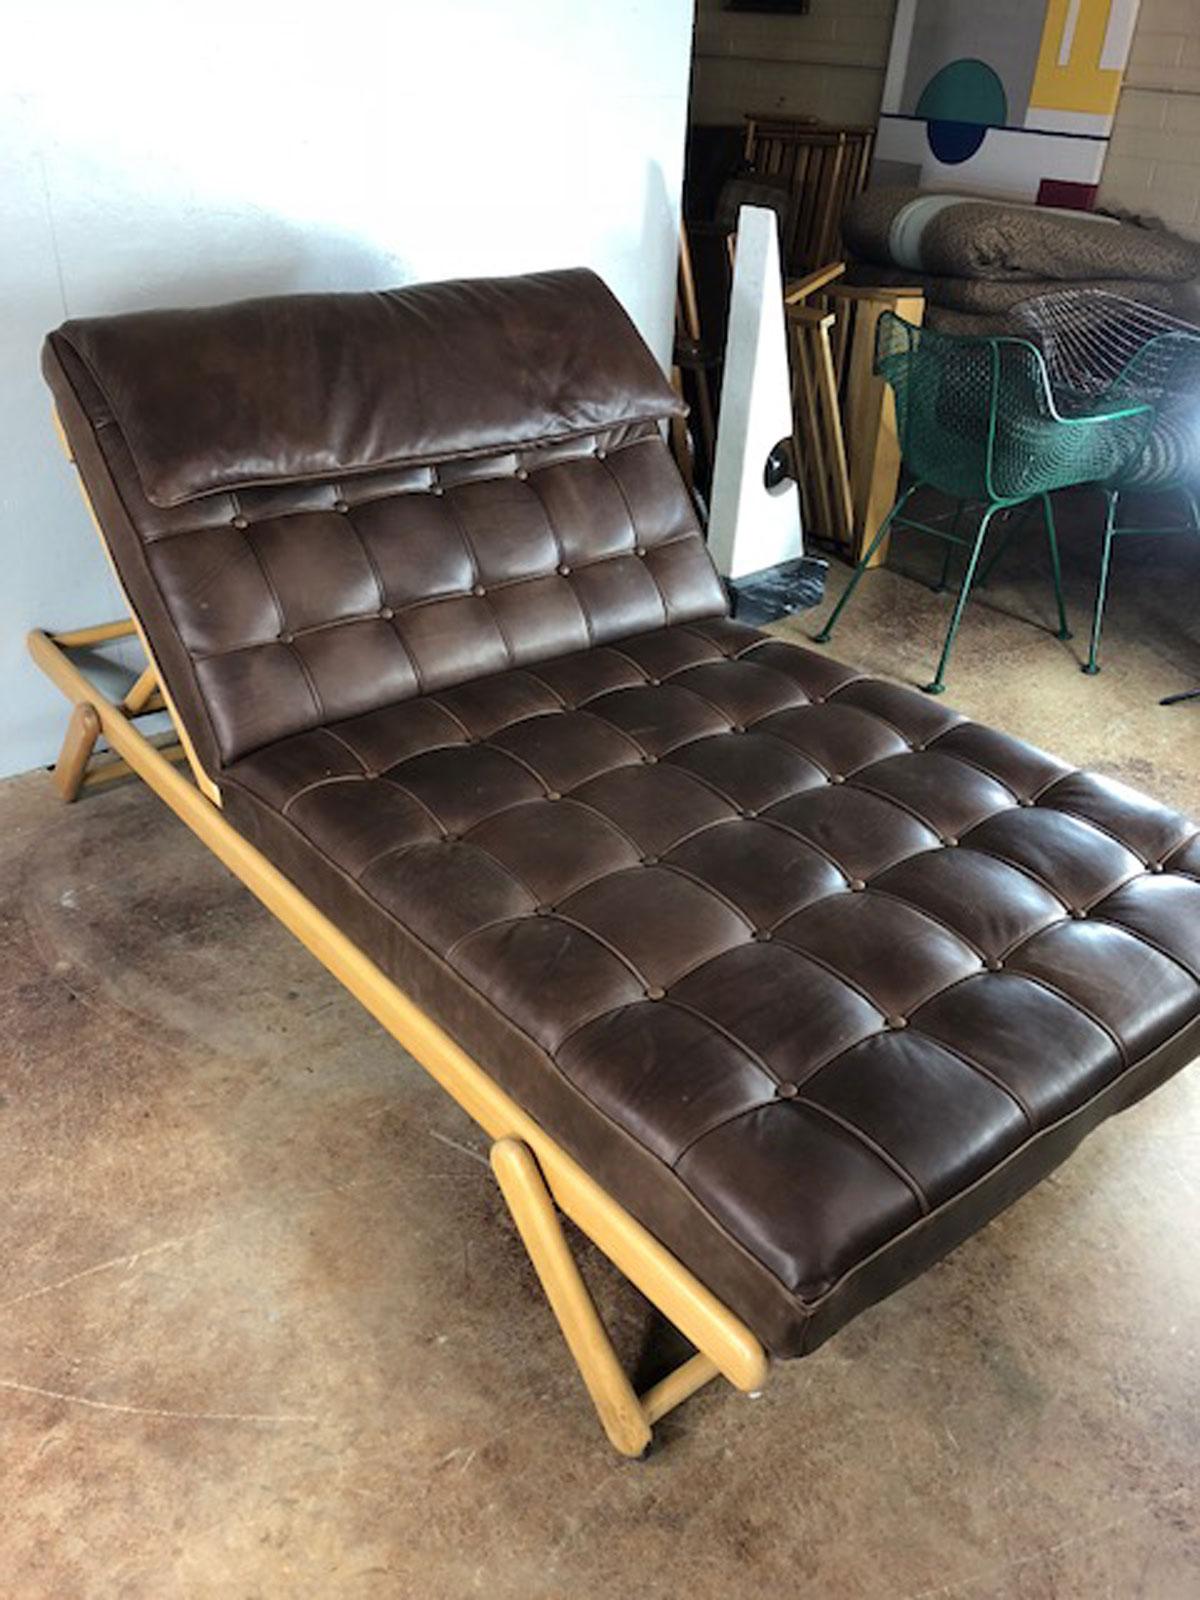 Unique double-wide leather and multi-position lounge chair and / or daybed. Frame is very well built and heavy. Made to last. New antique brown weathered style leather. Have never seen these units before. We have a pair, circa 1960s.